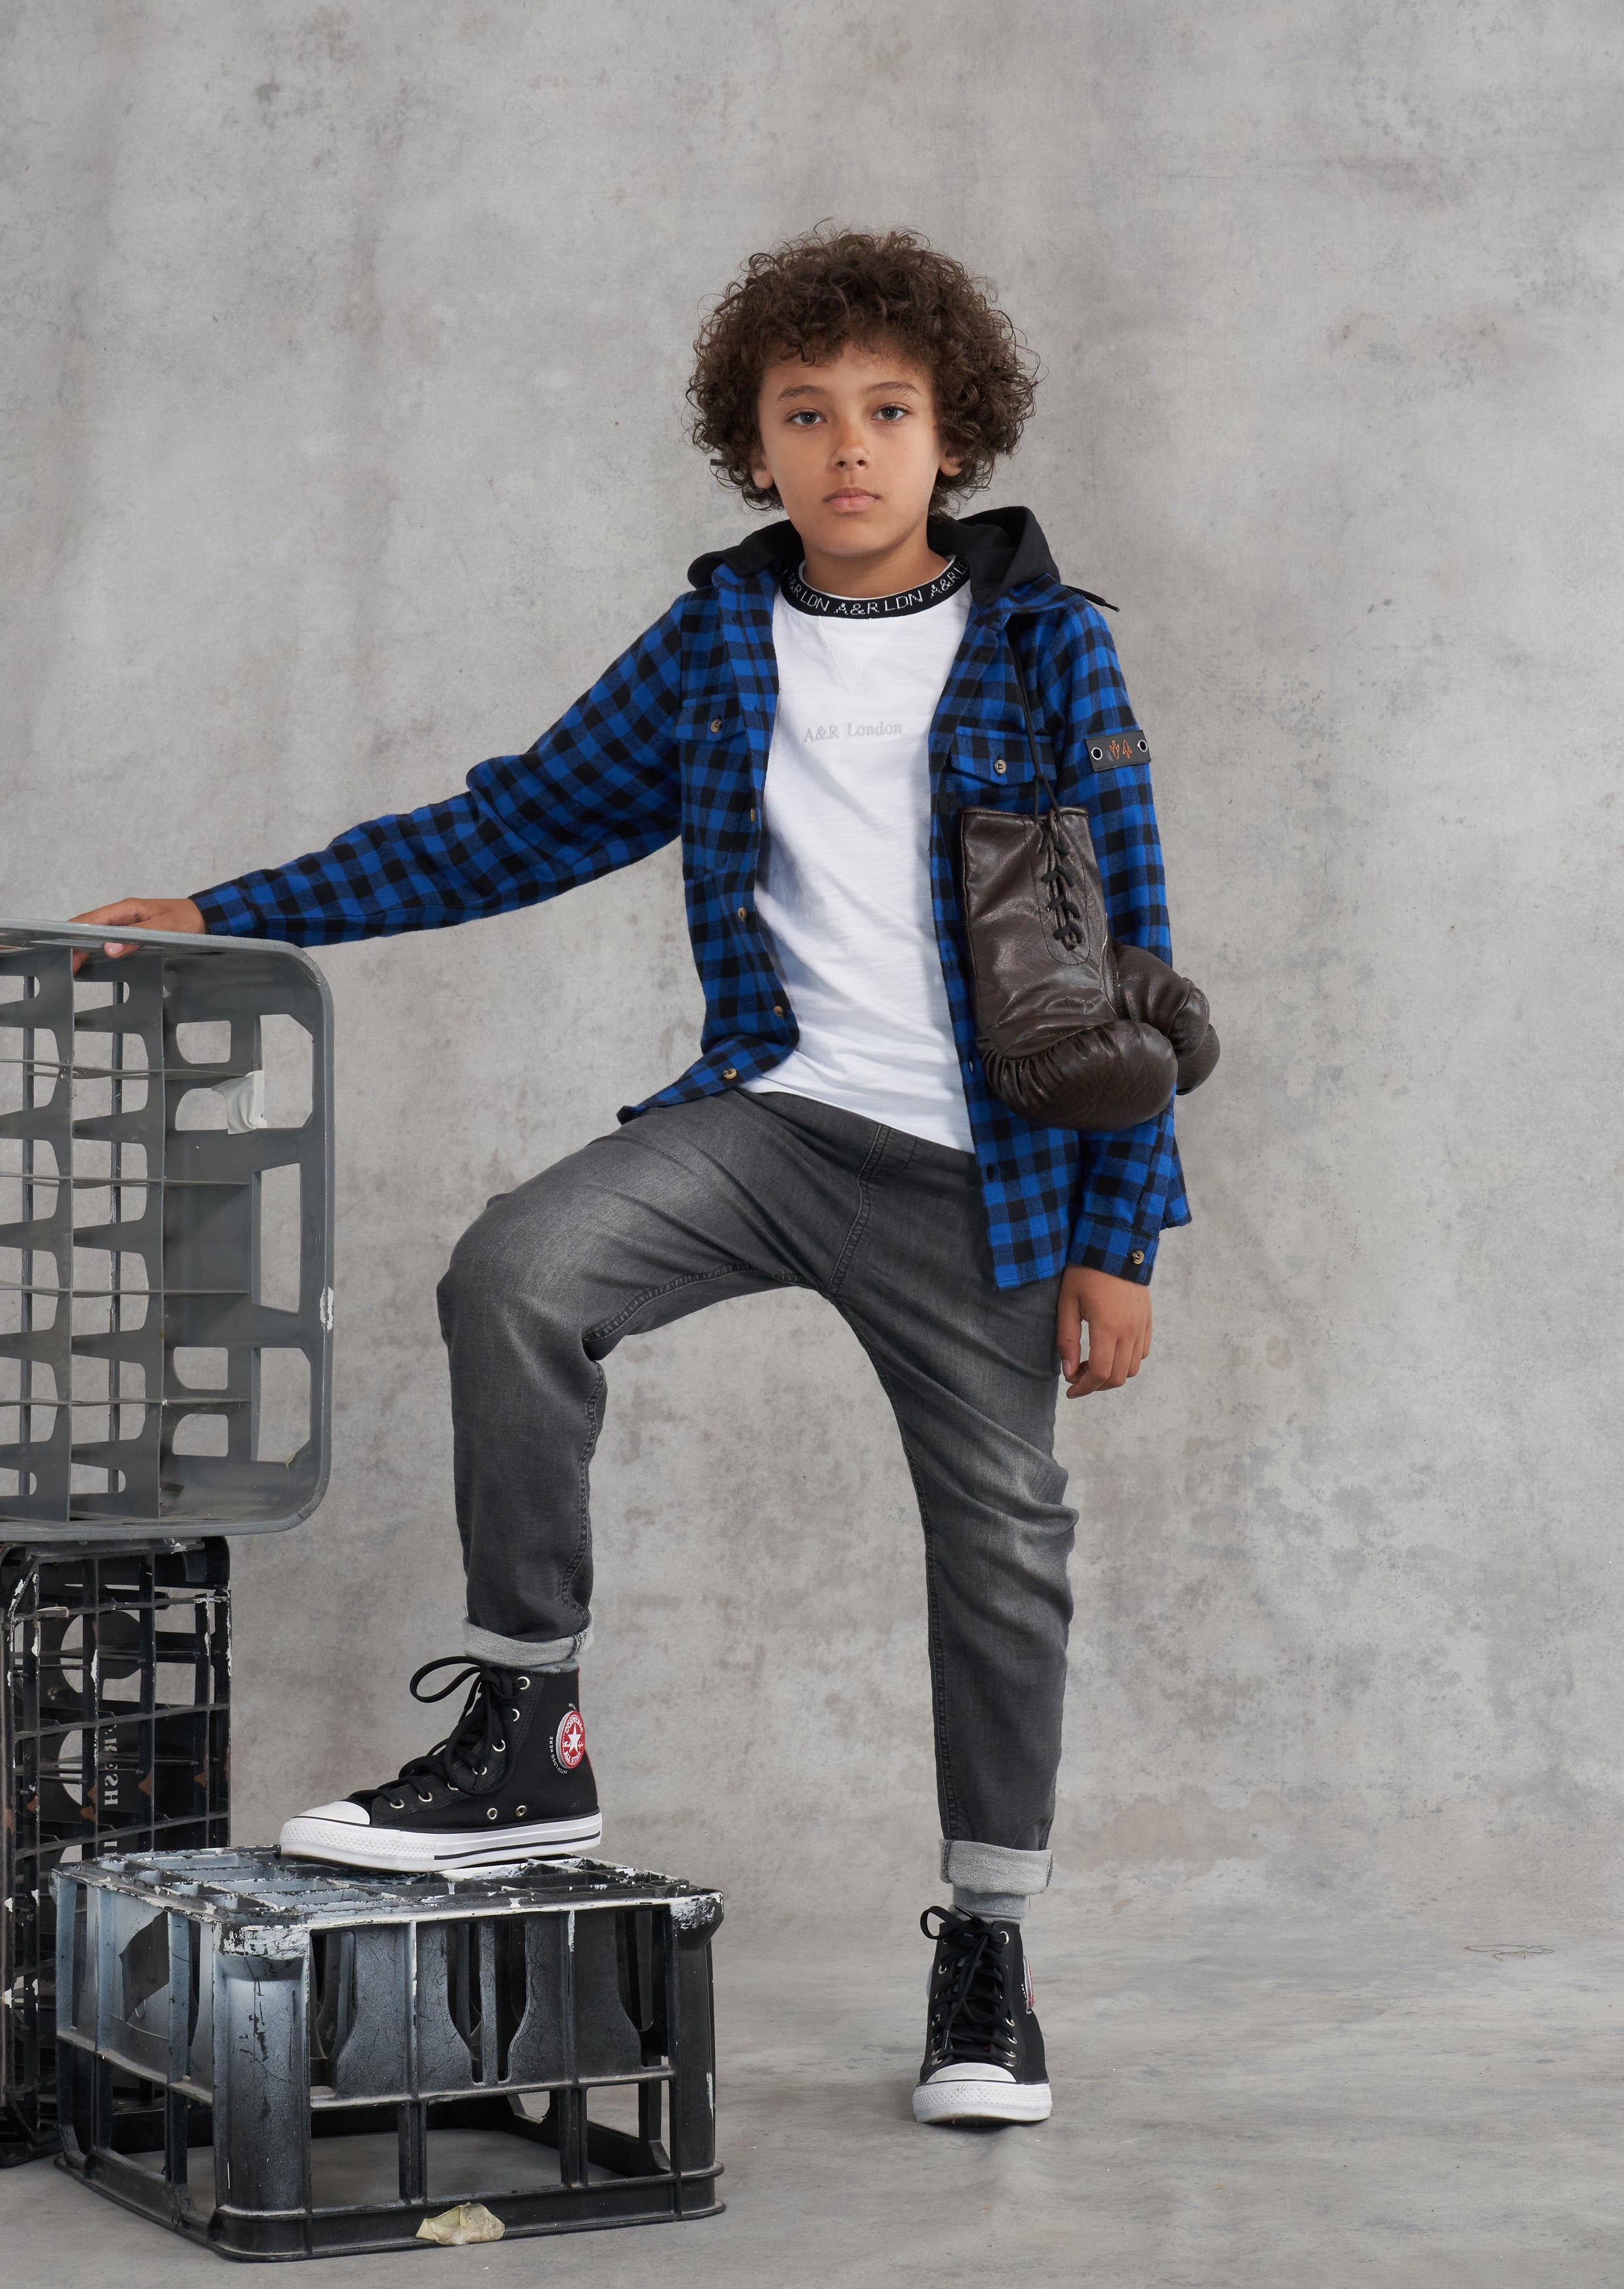 Boys Blue Checked Full Sleeves Shirt with Hooded